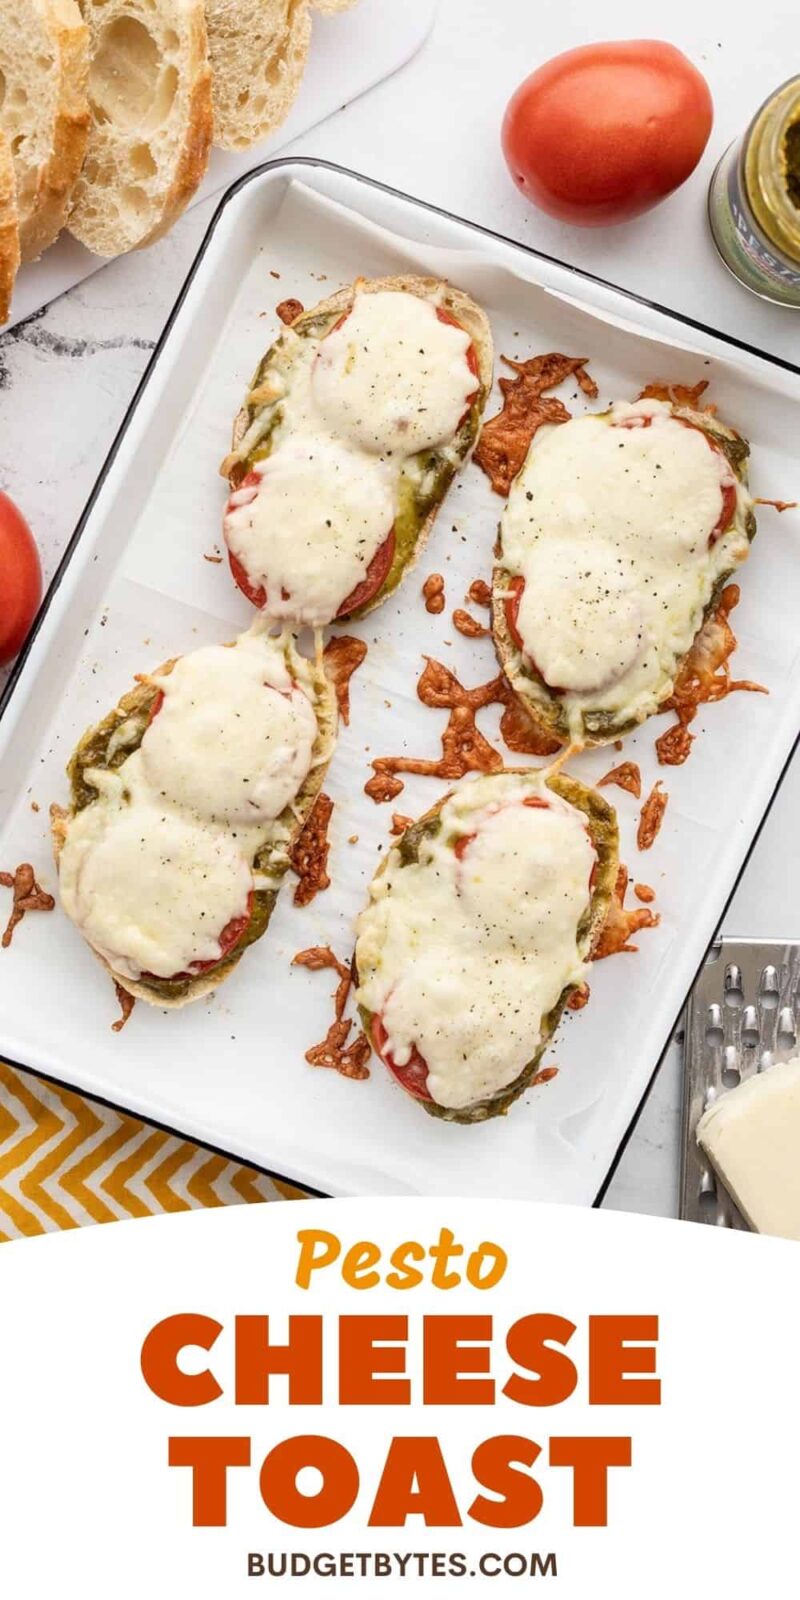 pesto cheese toasts on a baking sheet, title text at the bottom